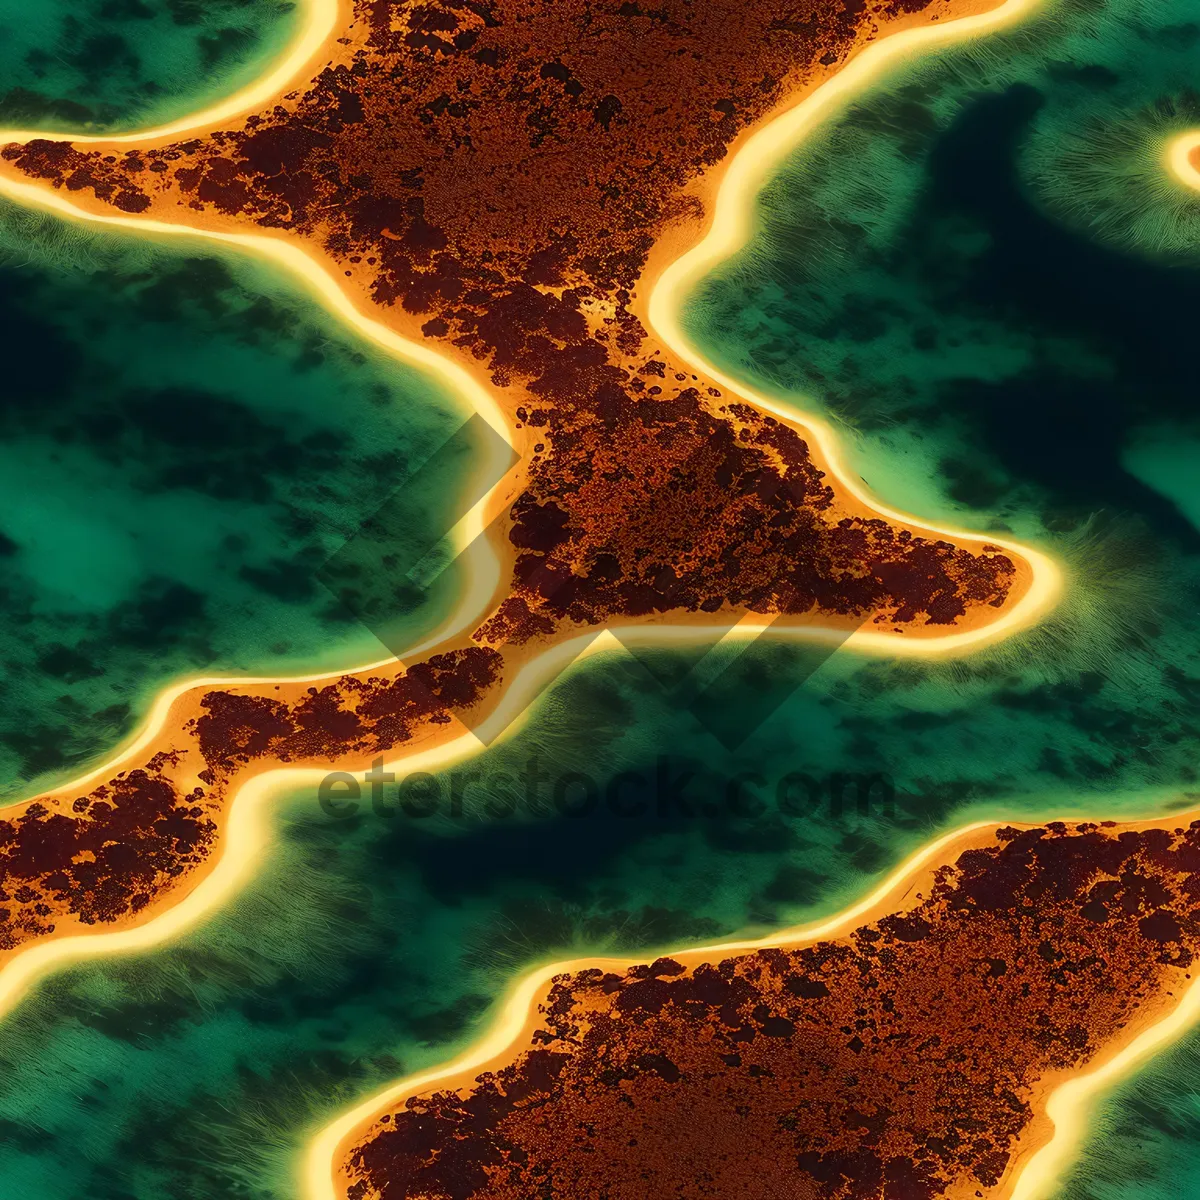 Picture of Textures of the Coral Reef: Vibrant Waves of the Ocean